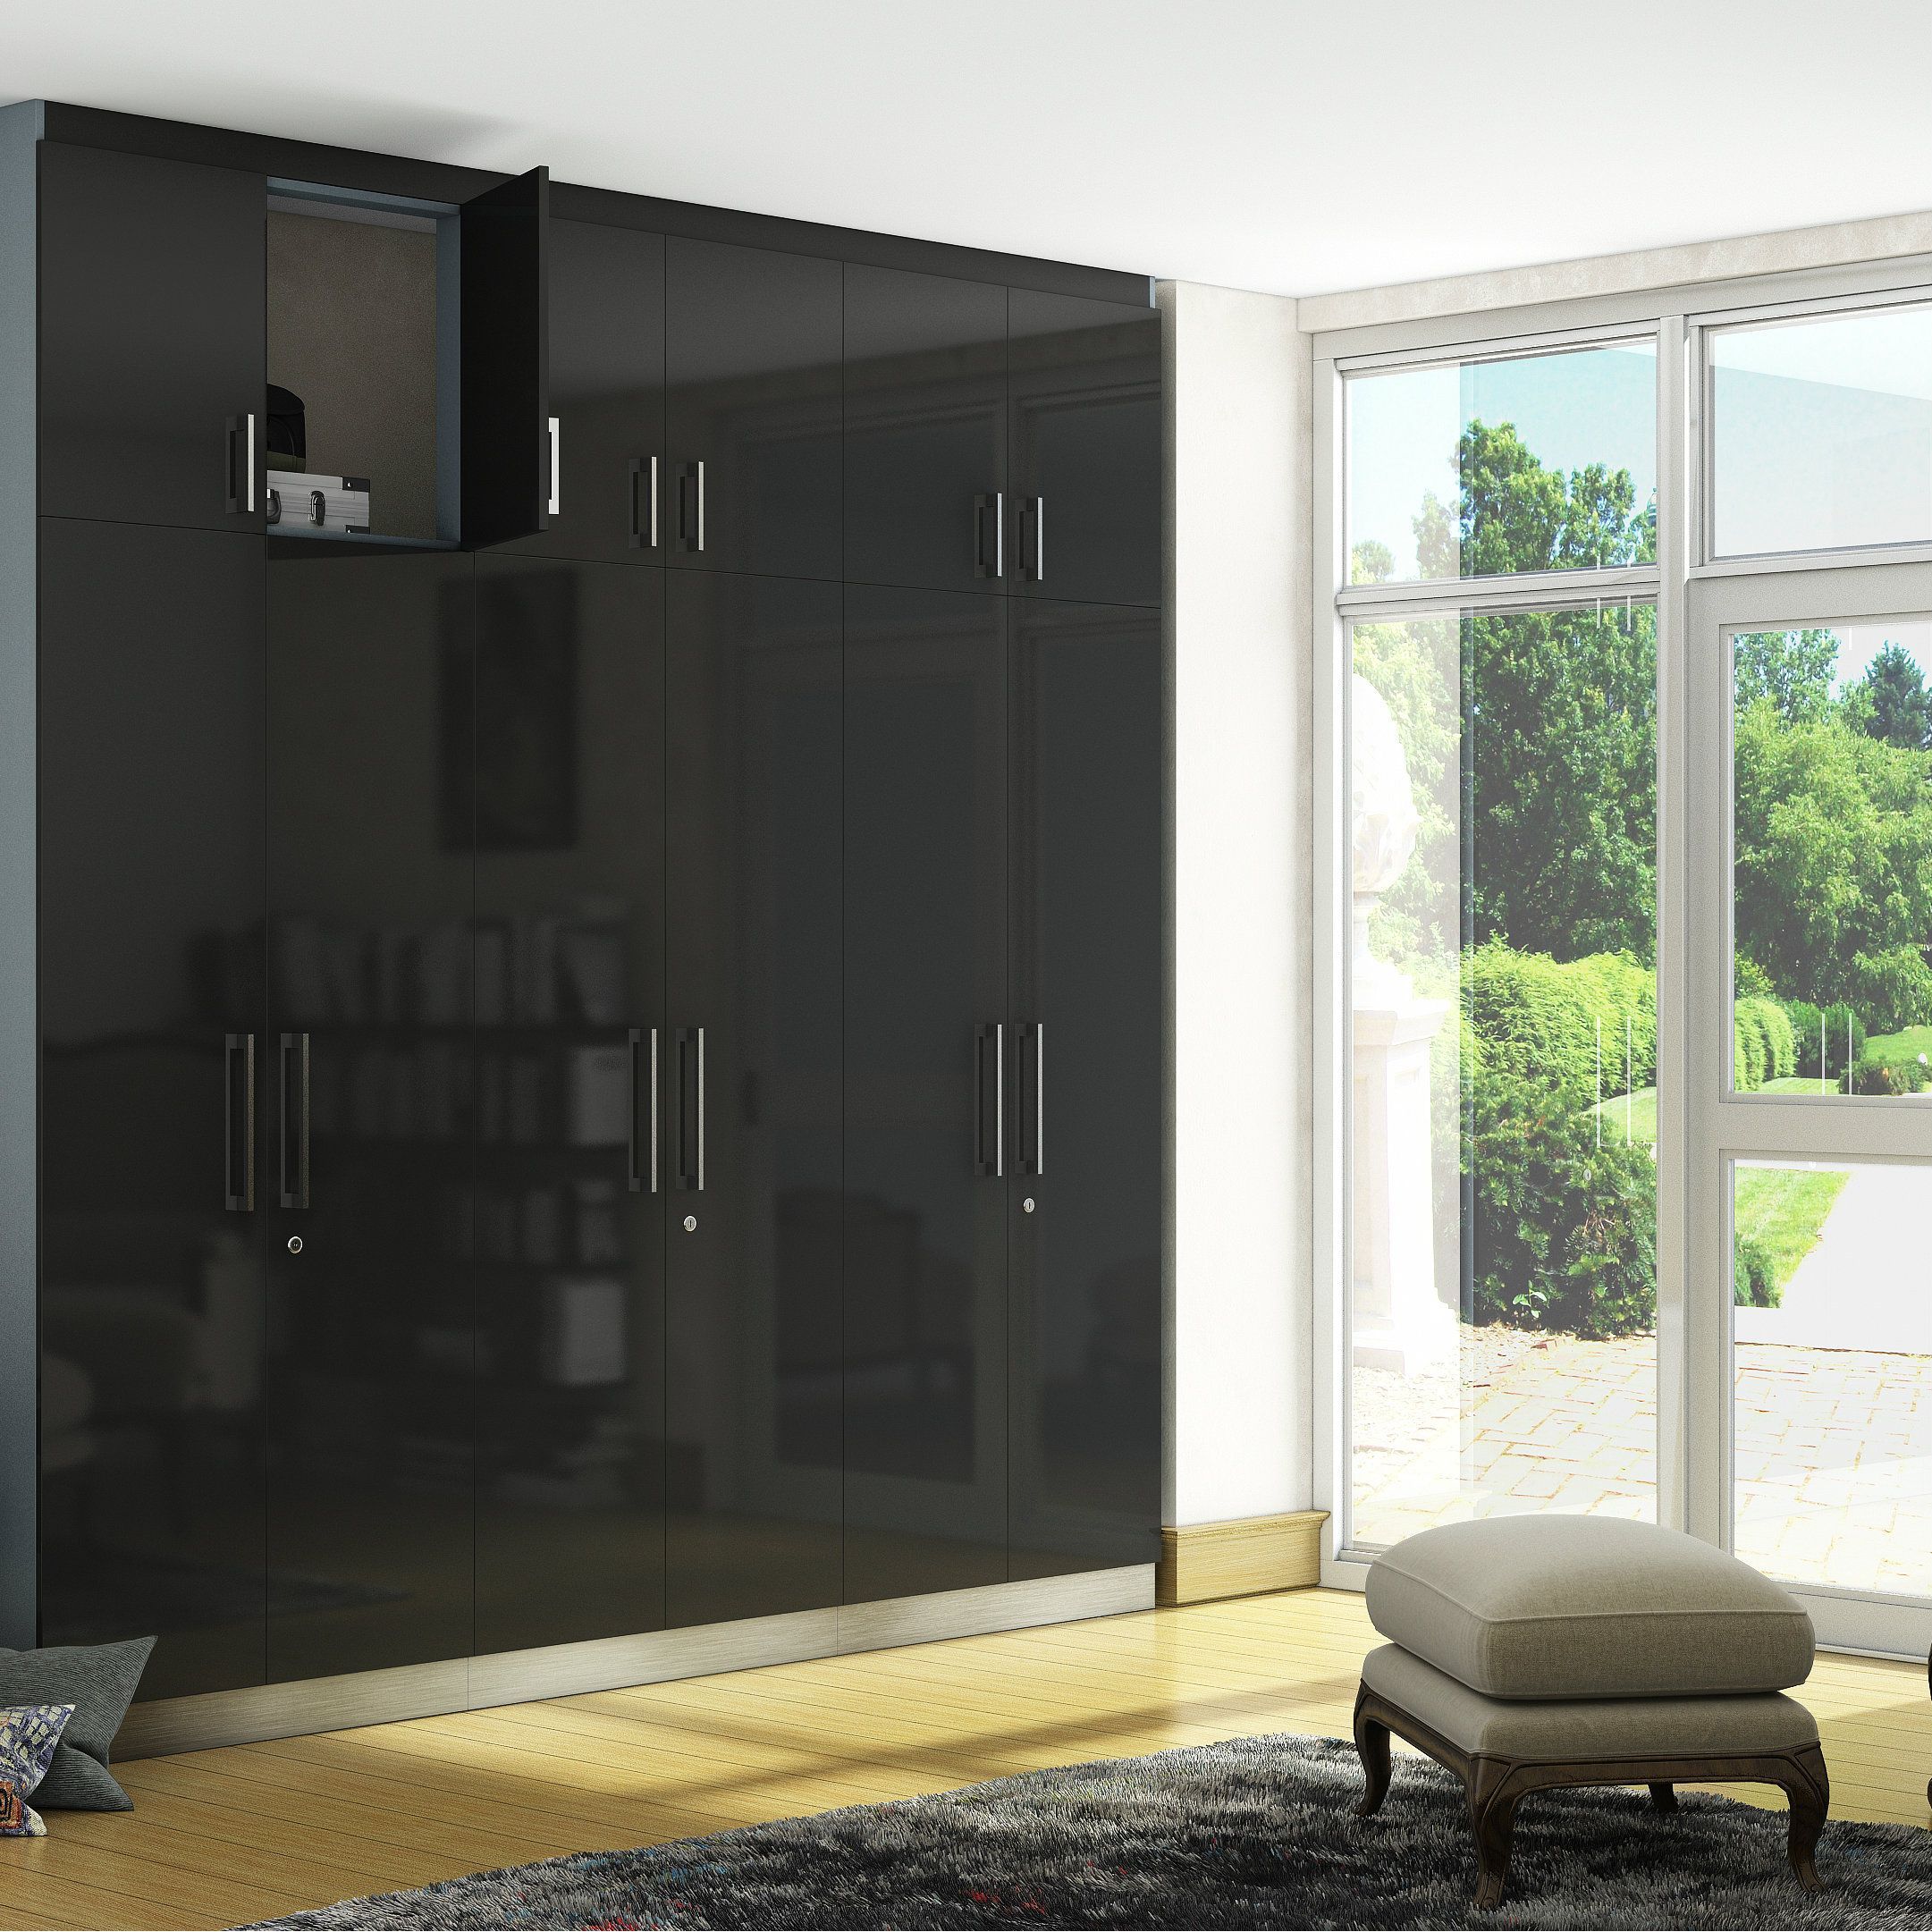 A Glossy Black Wardrobe That Is Every Bit As Impressive And Functional |  Wardrobe Design, Furniture Design, Grey Wardrobe Regarding Black Gloss Wardrobes (Photo 3 of 15)